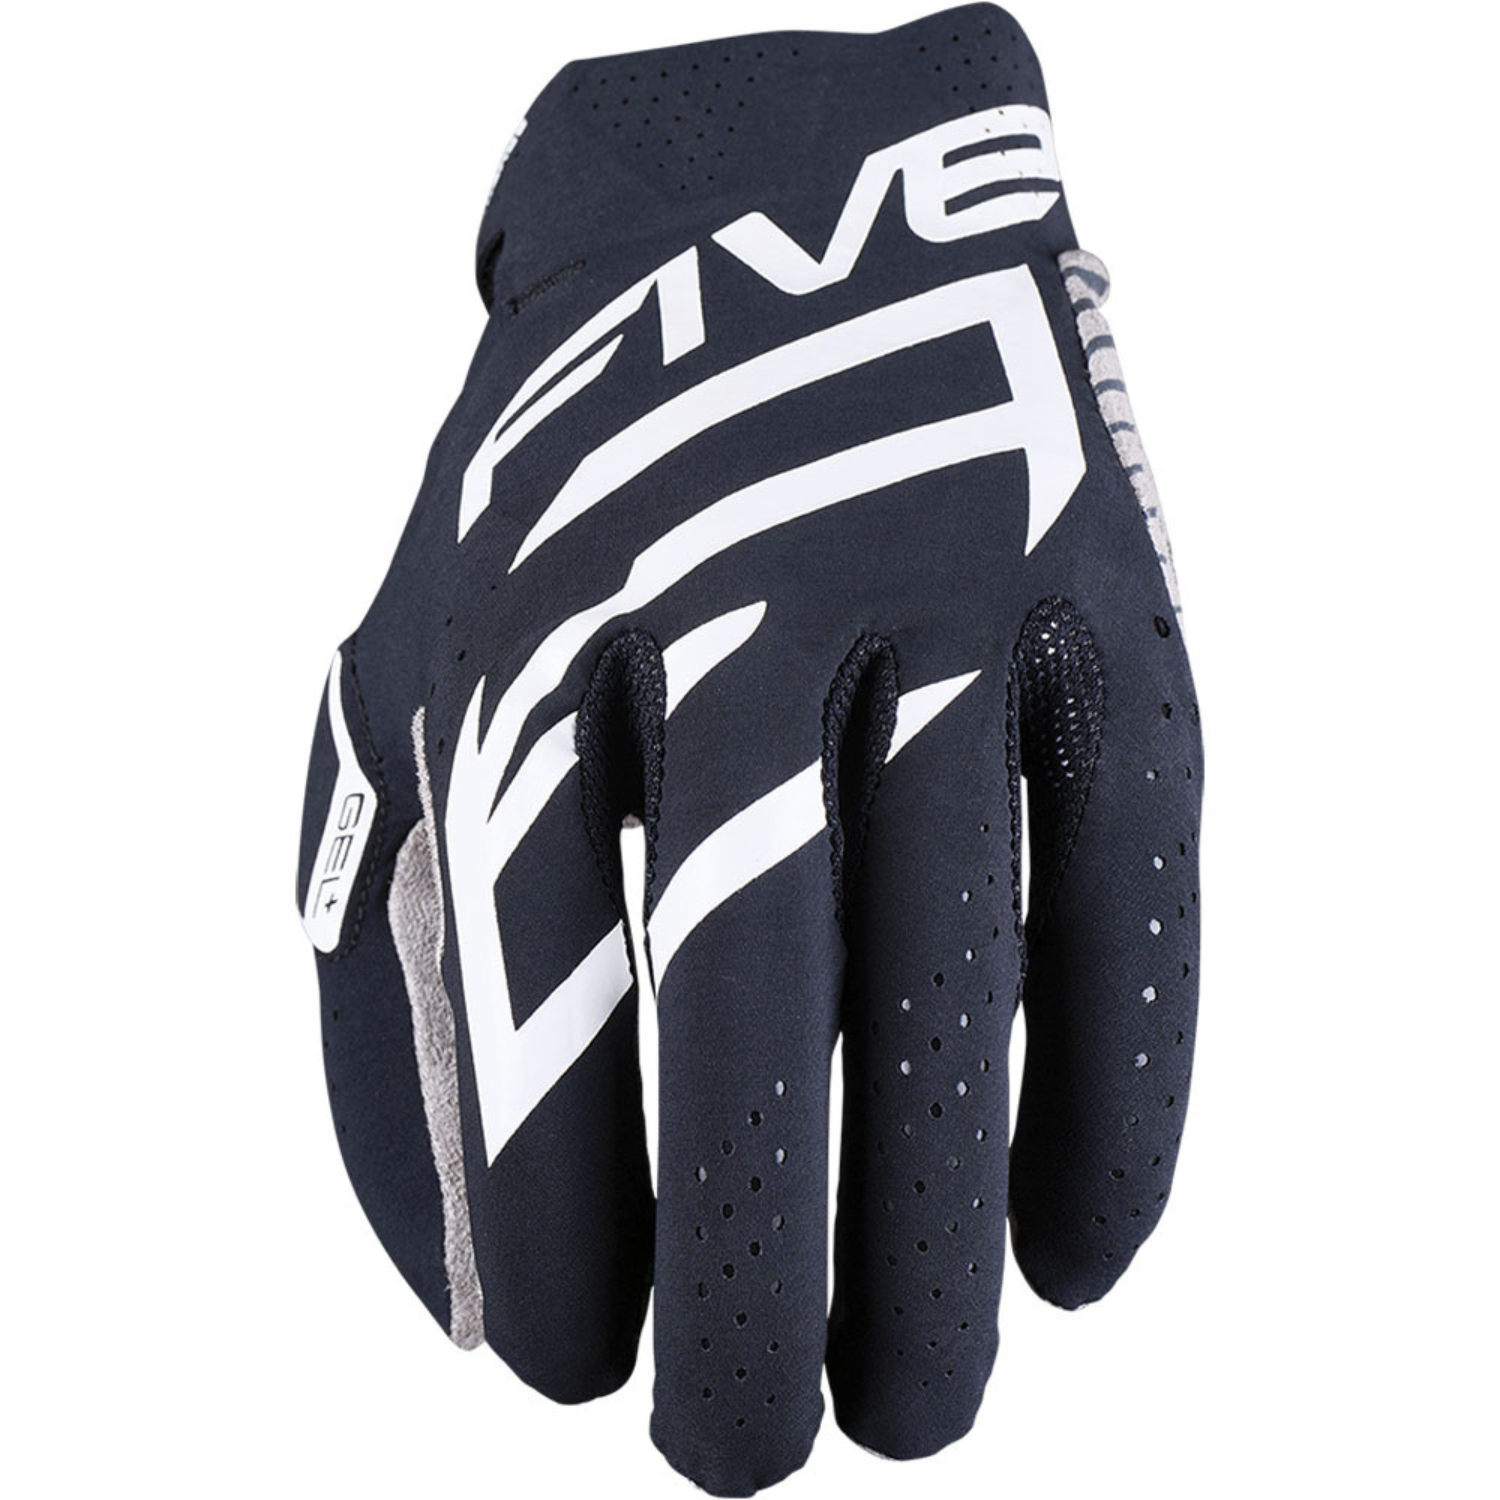 Image of Five MXF Race Gloves Black White Size S ID 3841300111495